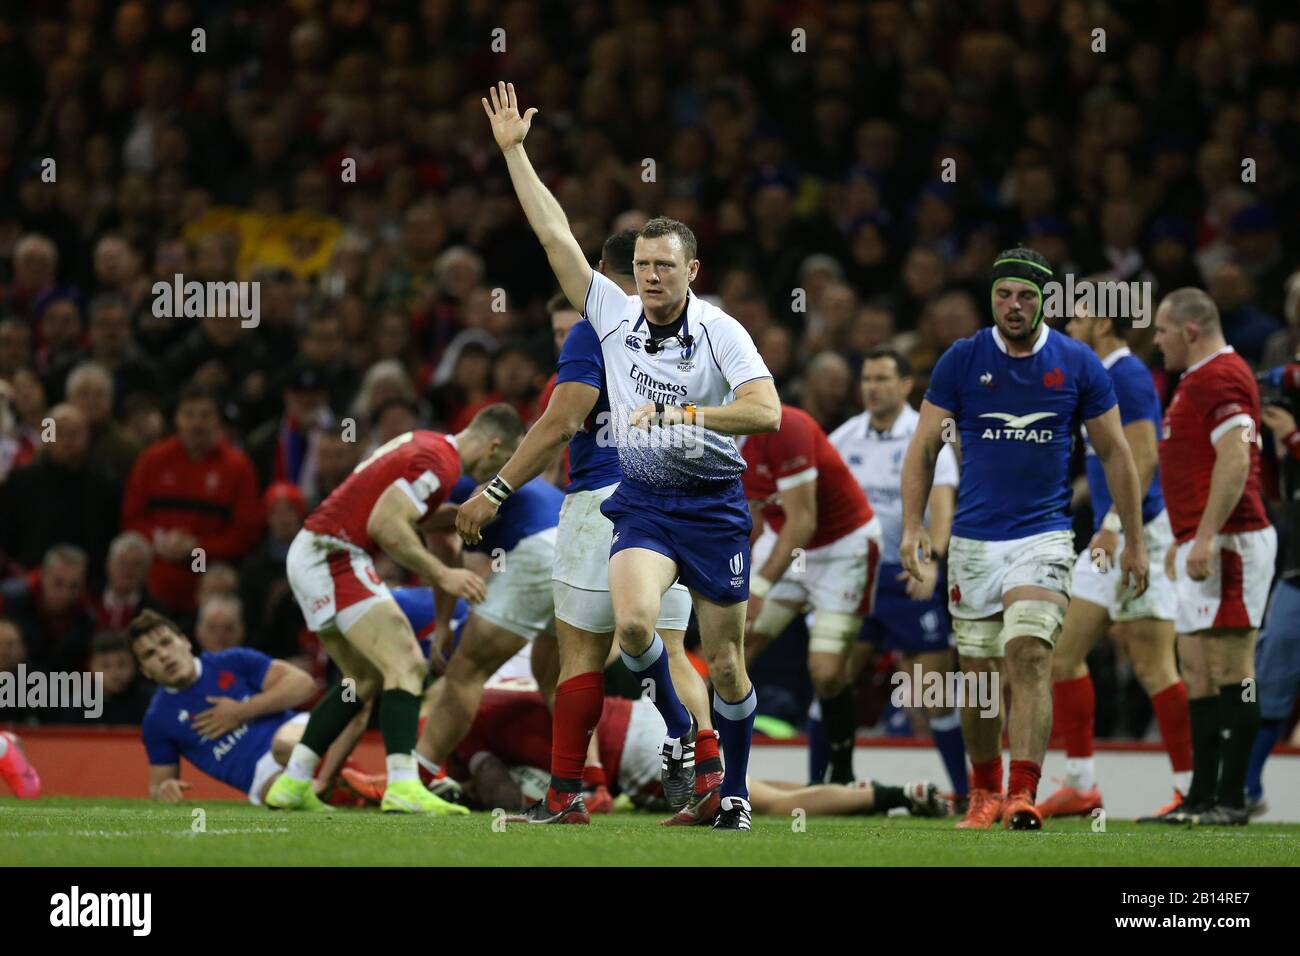 Cardiff, UK. 22nd Feb, 2020. Referee Matthew Carley. Wales v France, Guinness Six Nations championship 2020 international rugby match at the Principality Stadium in Cardiff, Wales, UK on Saturday 22nd February 2020. pic by Andrew Orchard/Alamy Live News PLEASE NOTE PICTURE AVAILABLE FOR EDITORIAL USE ONLY Stock Photo